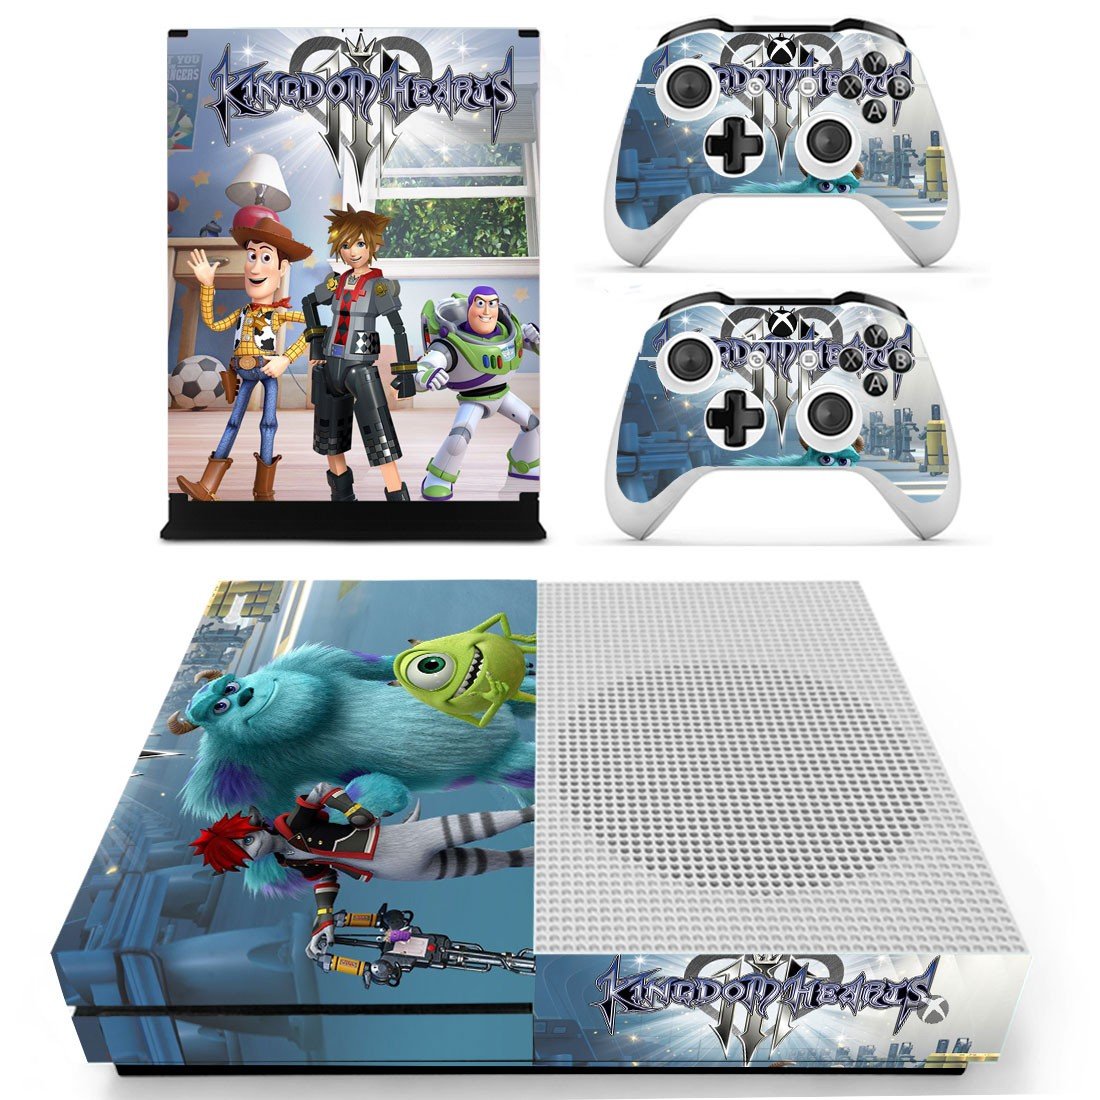 Xbox One S And Controllers Skin Sticker - Kingdom Hearts 3